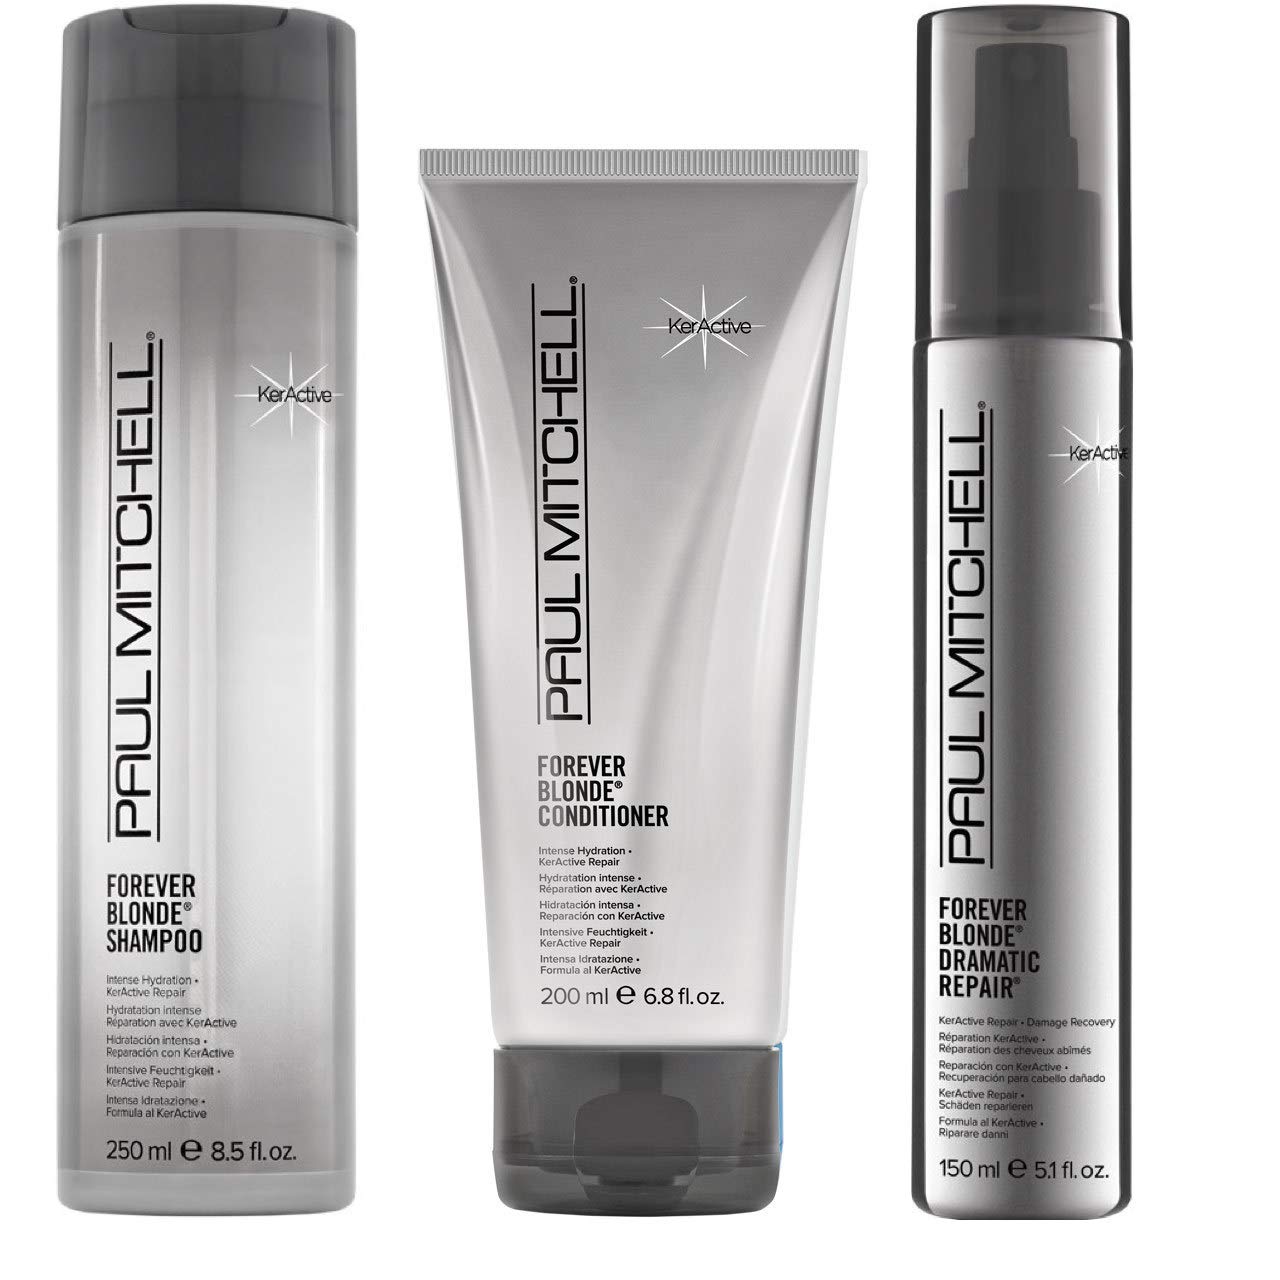 FOREVER BLONDE Shampoo & Conditioner Duo